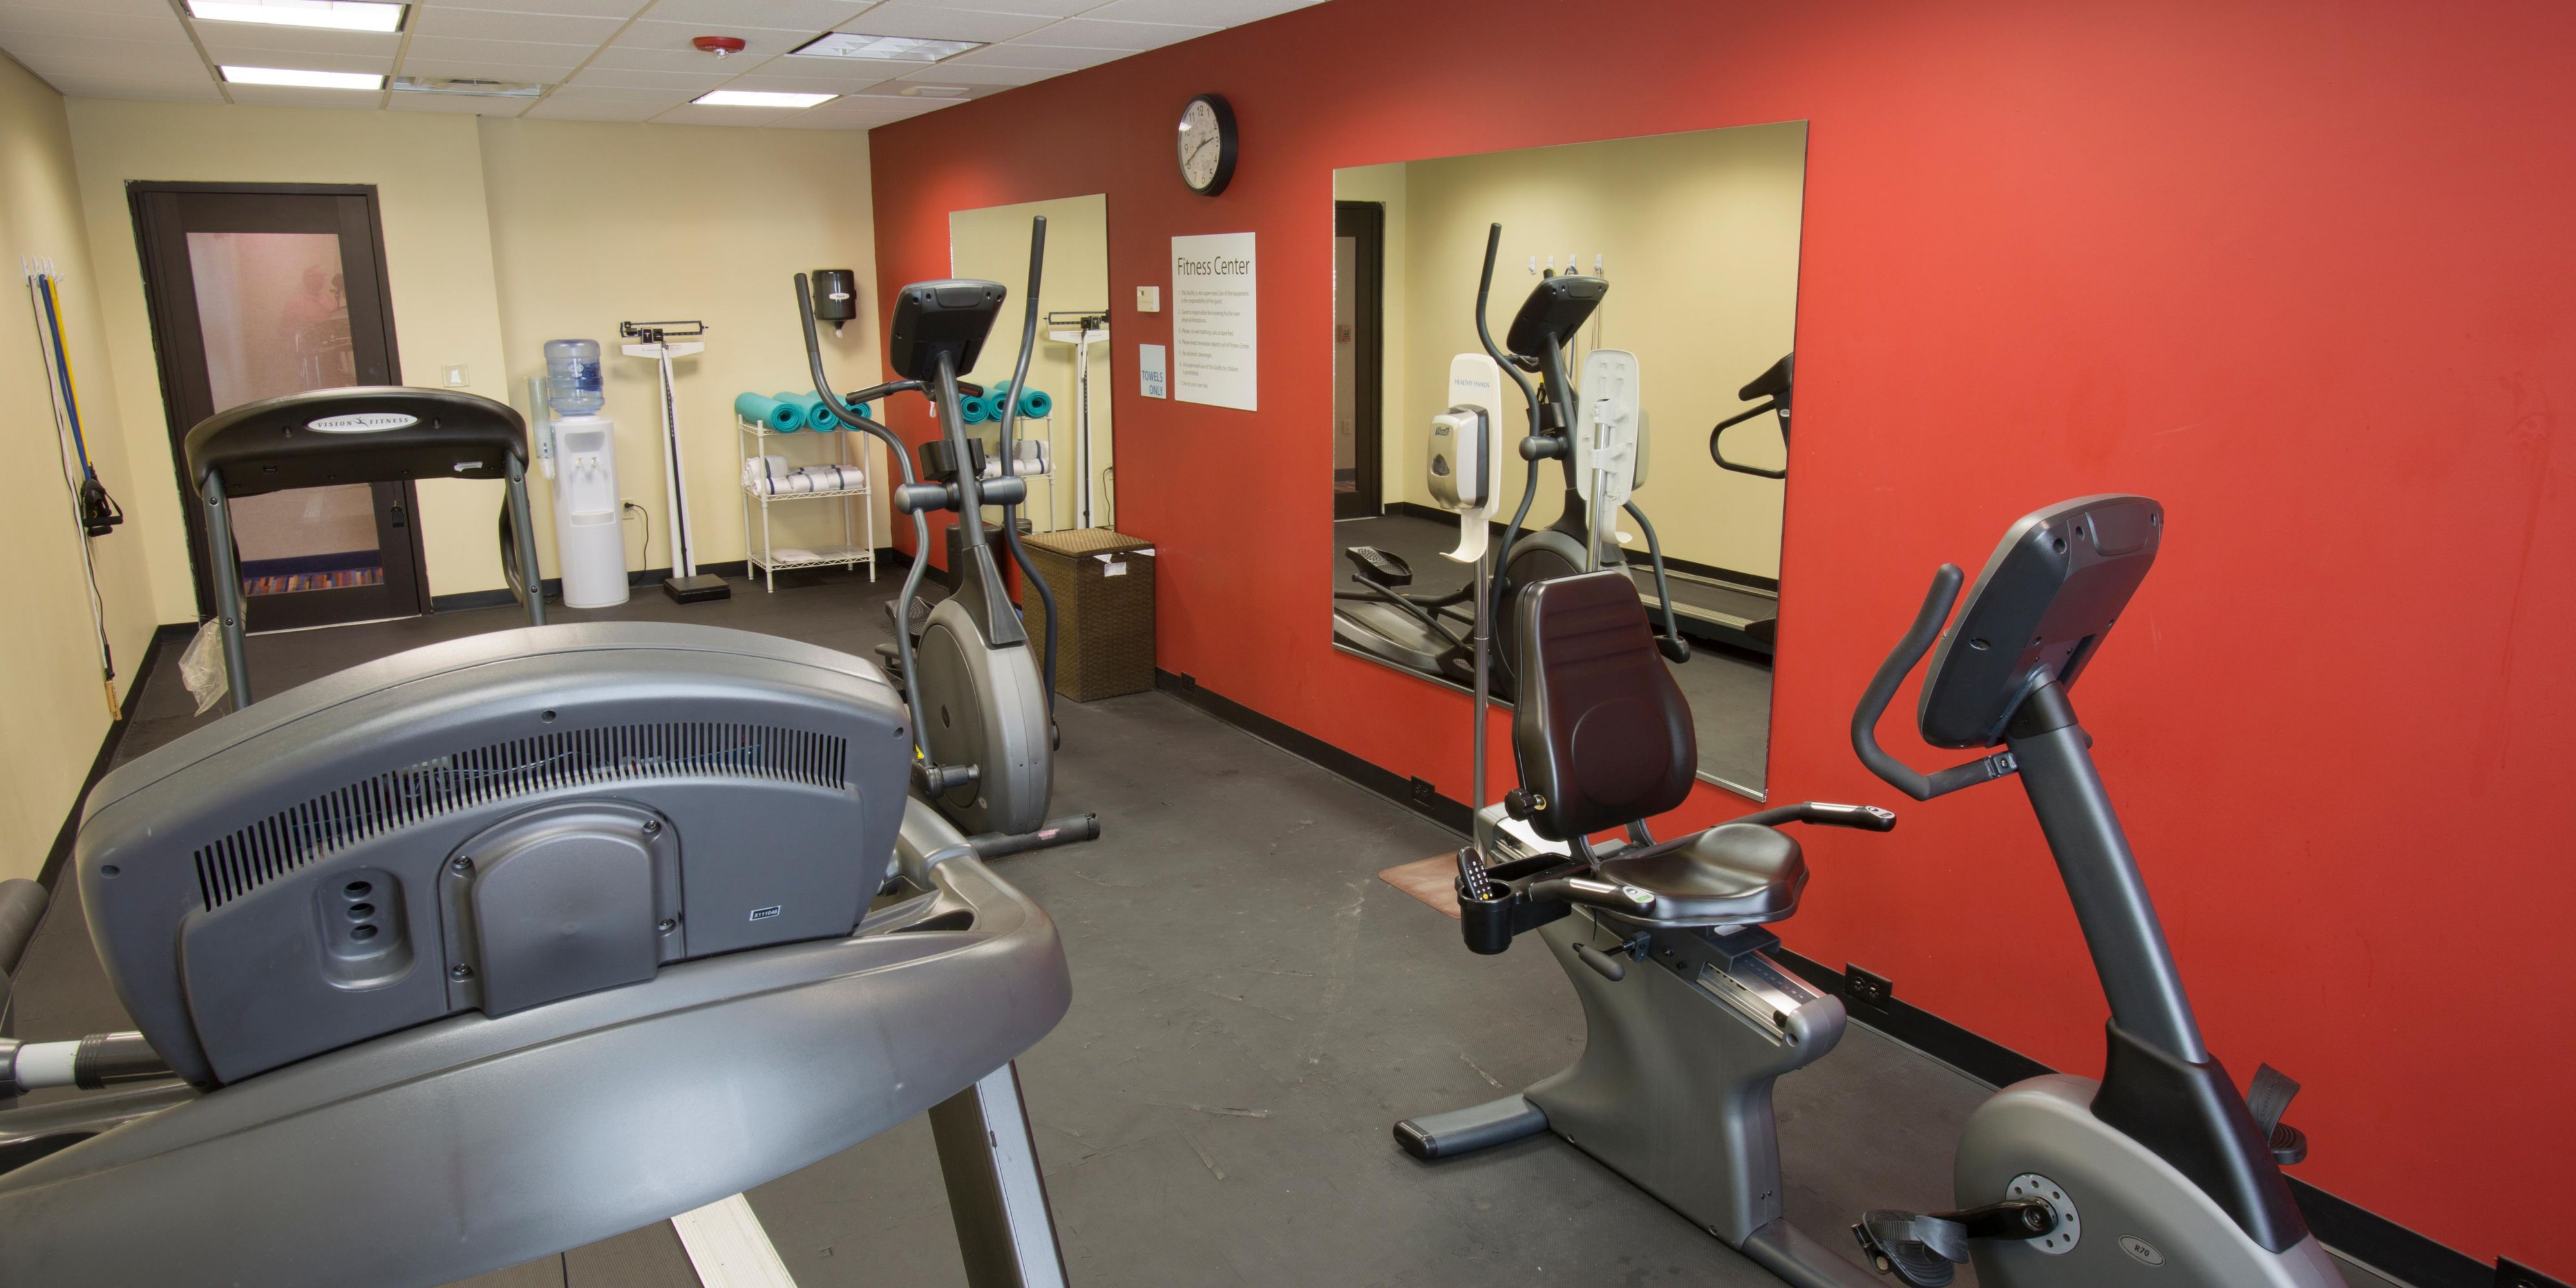 Don't miss your daily workout routine just because you're on the road! Available 24 hours daily to all guests. The fitness center offers state-of-the-art equipment, such as, a treadmill, elliptical machine, bicycle, and more.
